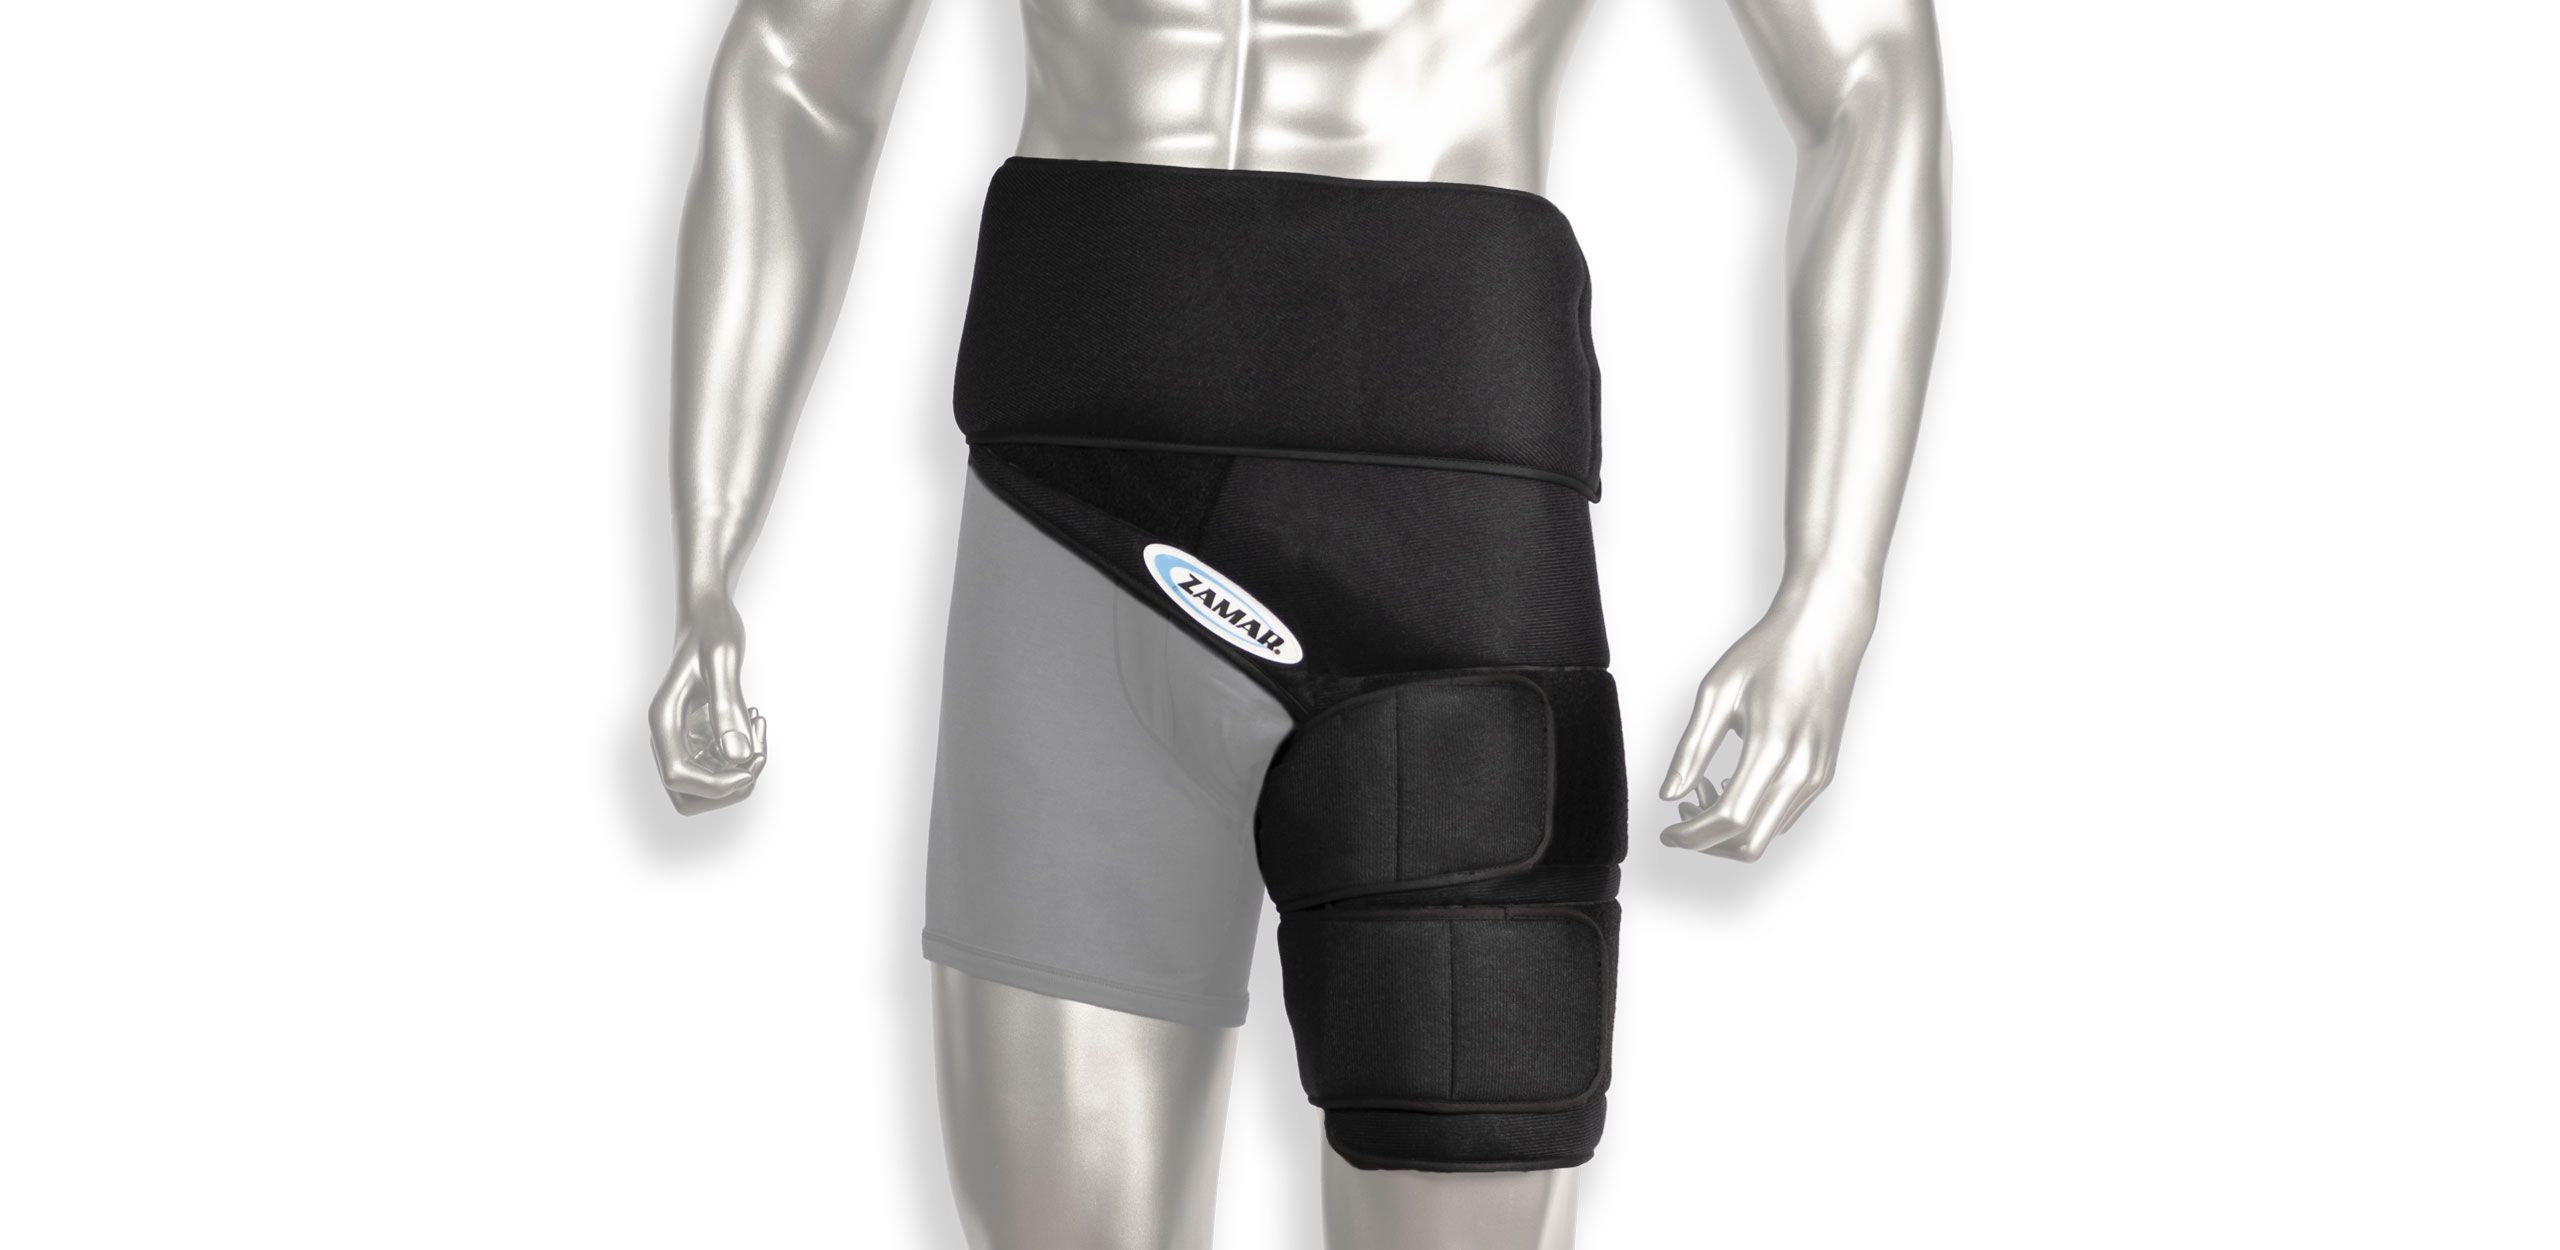 Zamar Hot and Cold Therapy Wraps - Left Hip Wrap Anatomic Design